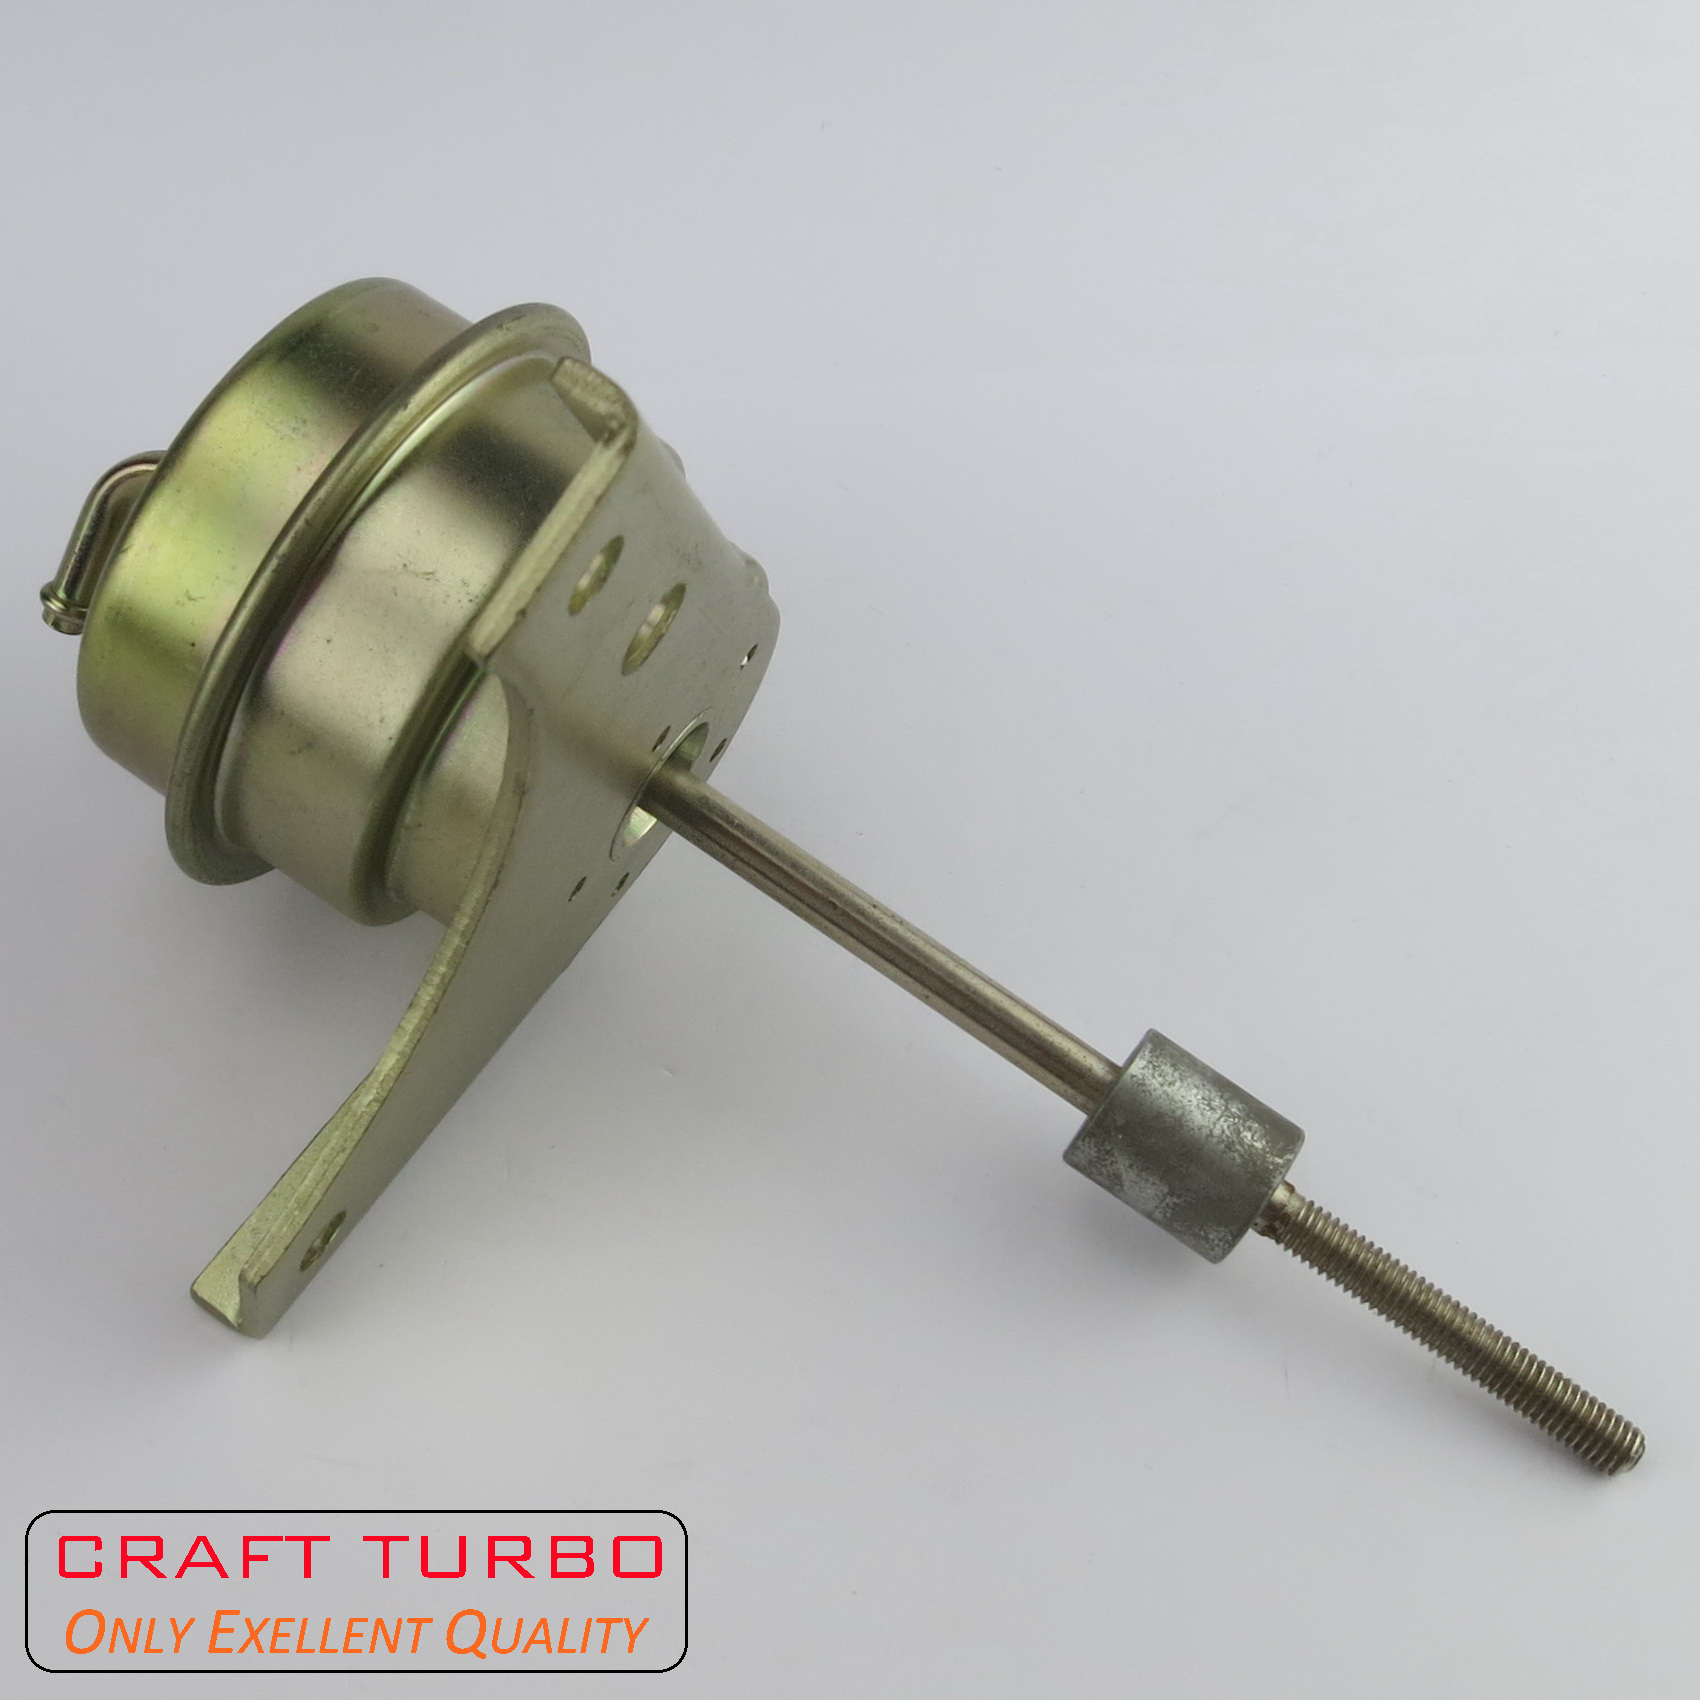 K03 Actuator for Turbochargers